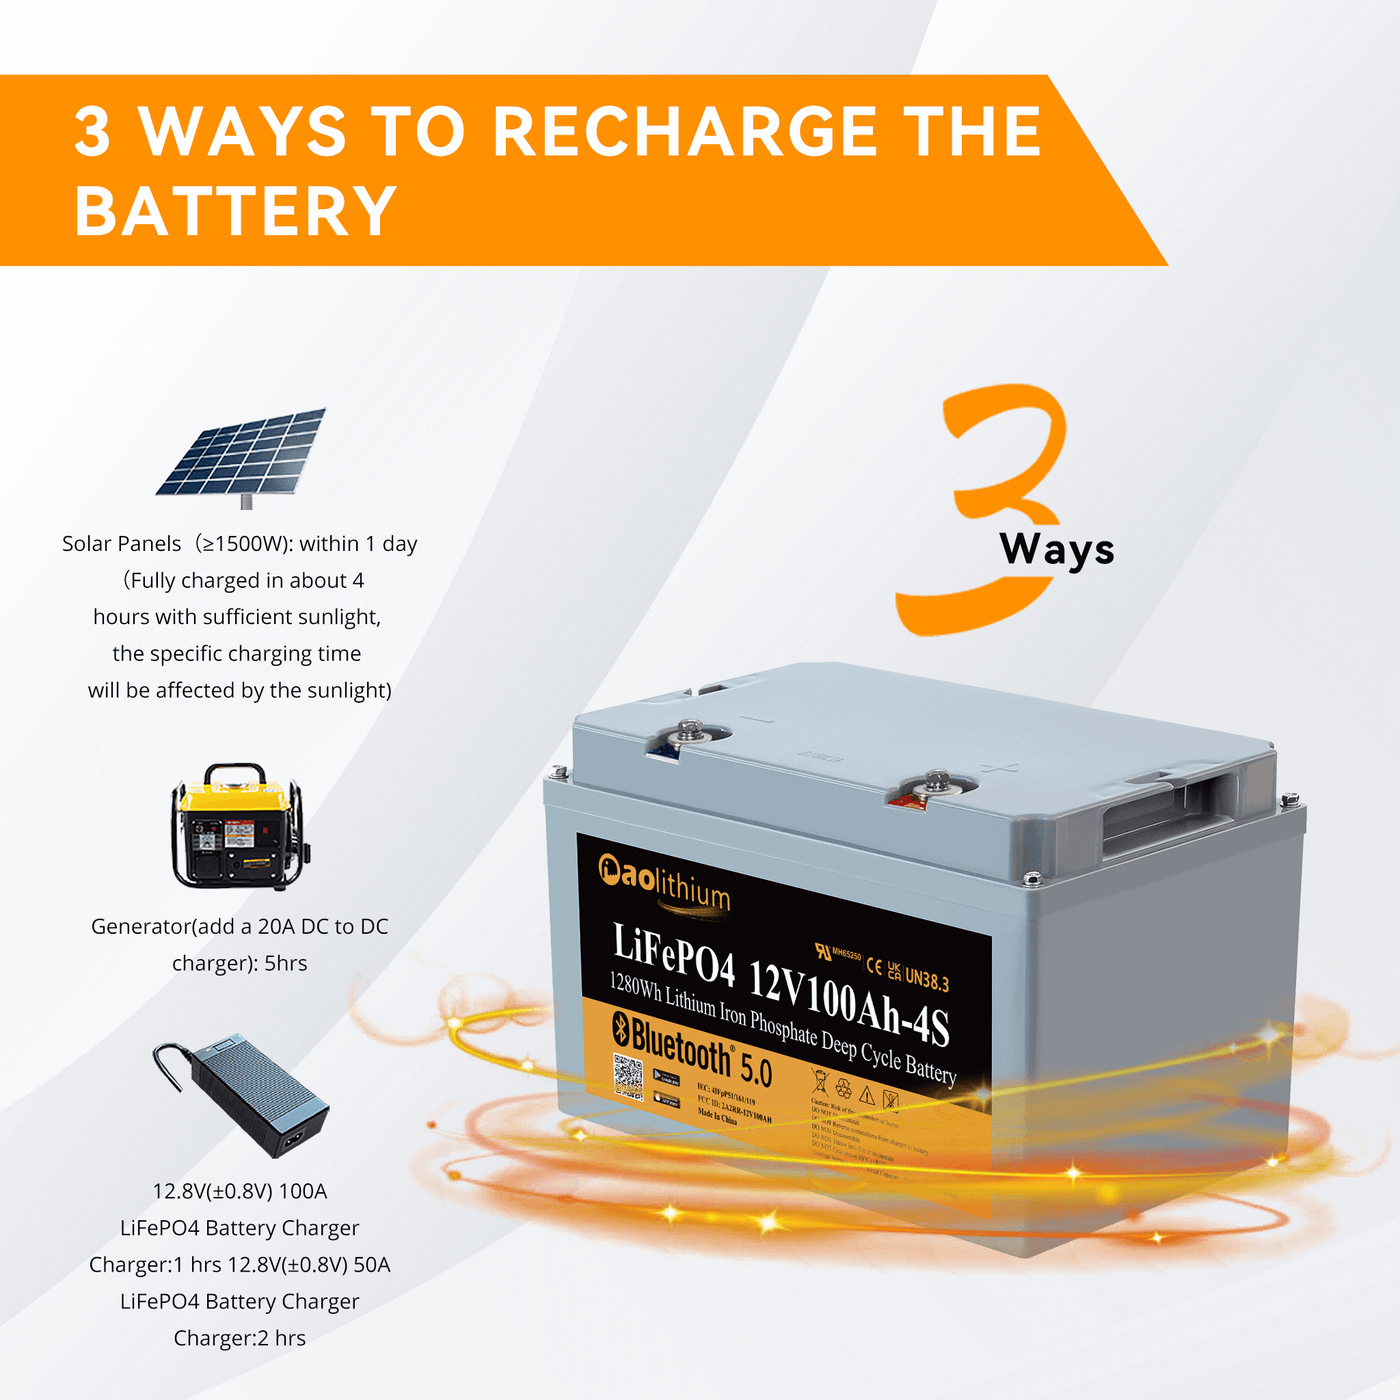 AOLITHIUM Lithium Battery 24v 200ah for Marine Trolling Motor Deep Cycle High & Low Temp Protection Battery 5120 Wh - 4 Batteries